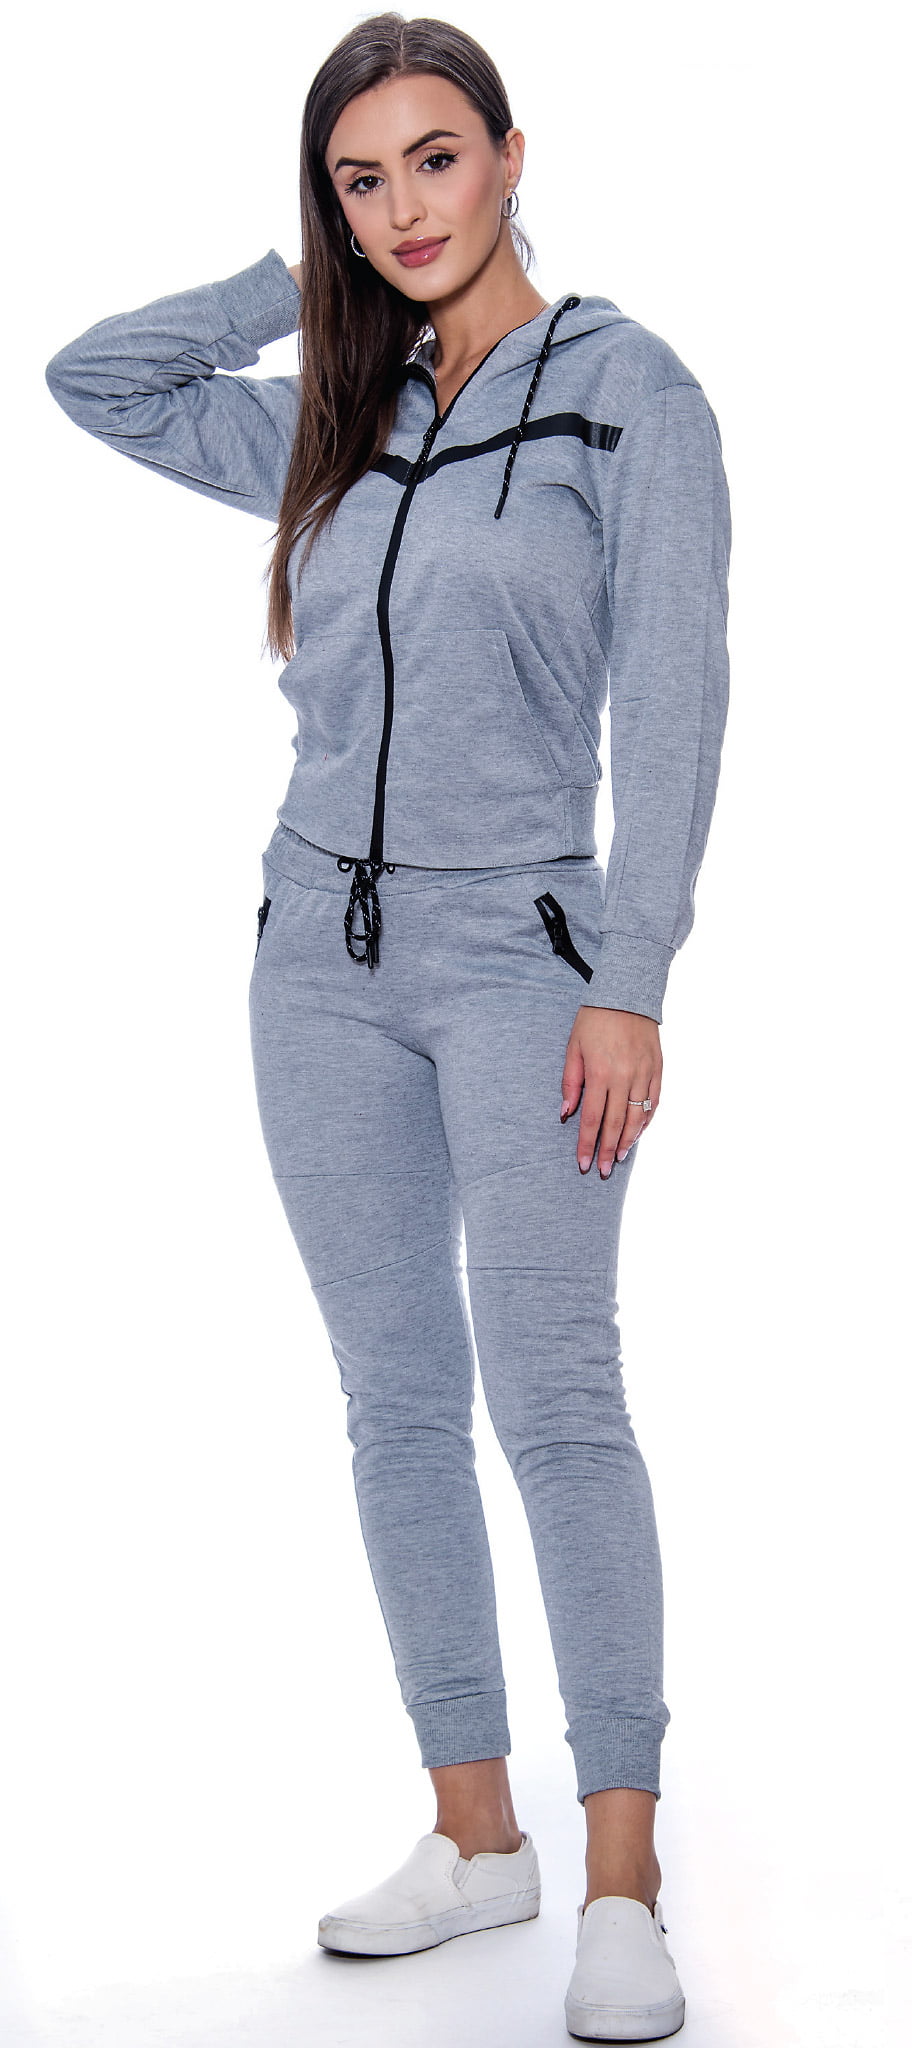 9 Crowns Women's Slim Fit Techno Hoodie Jogger Jacket and Pant